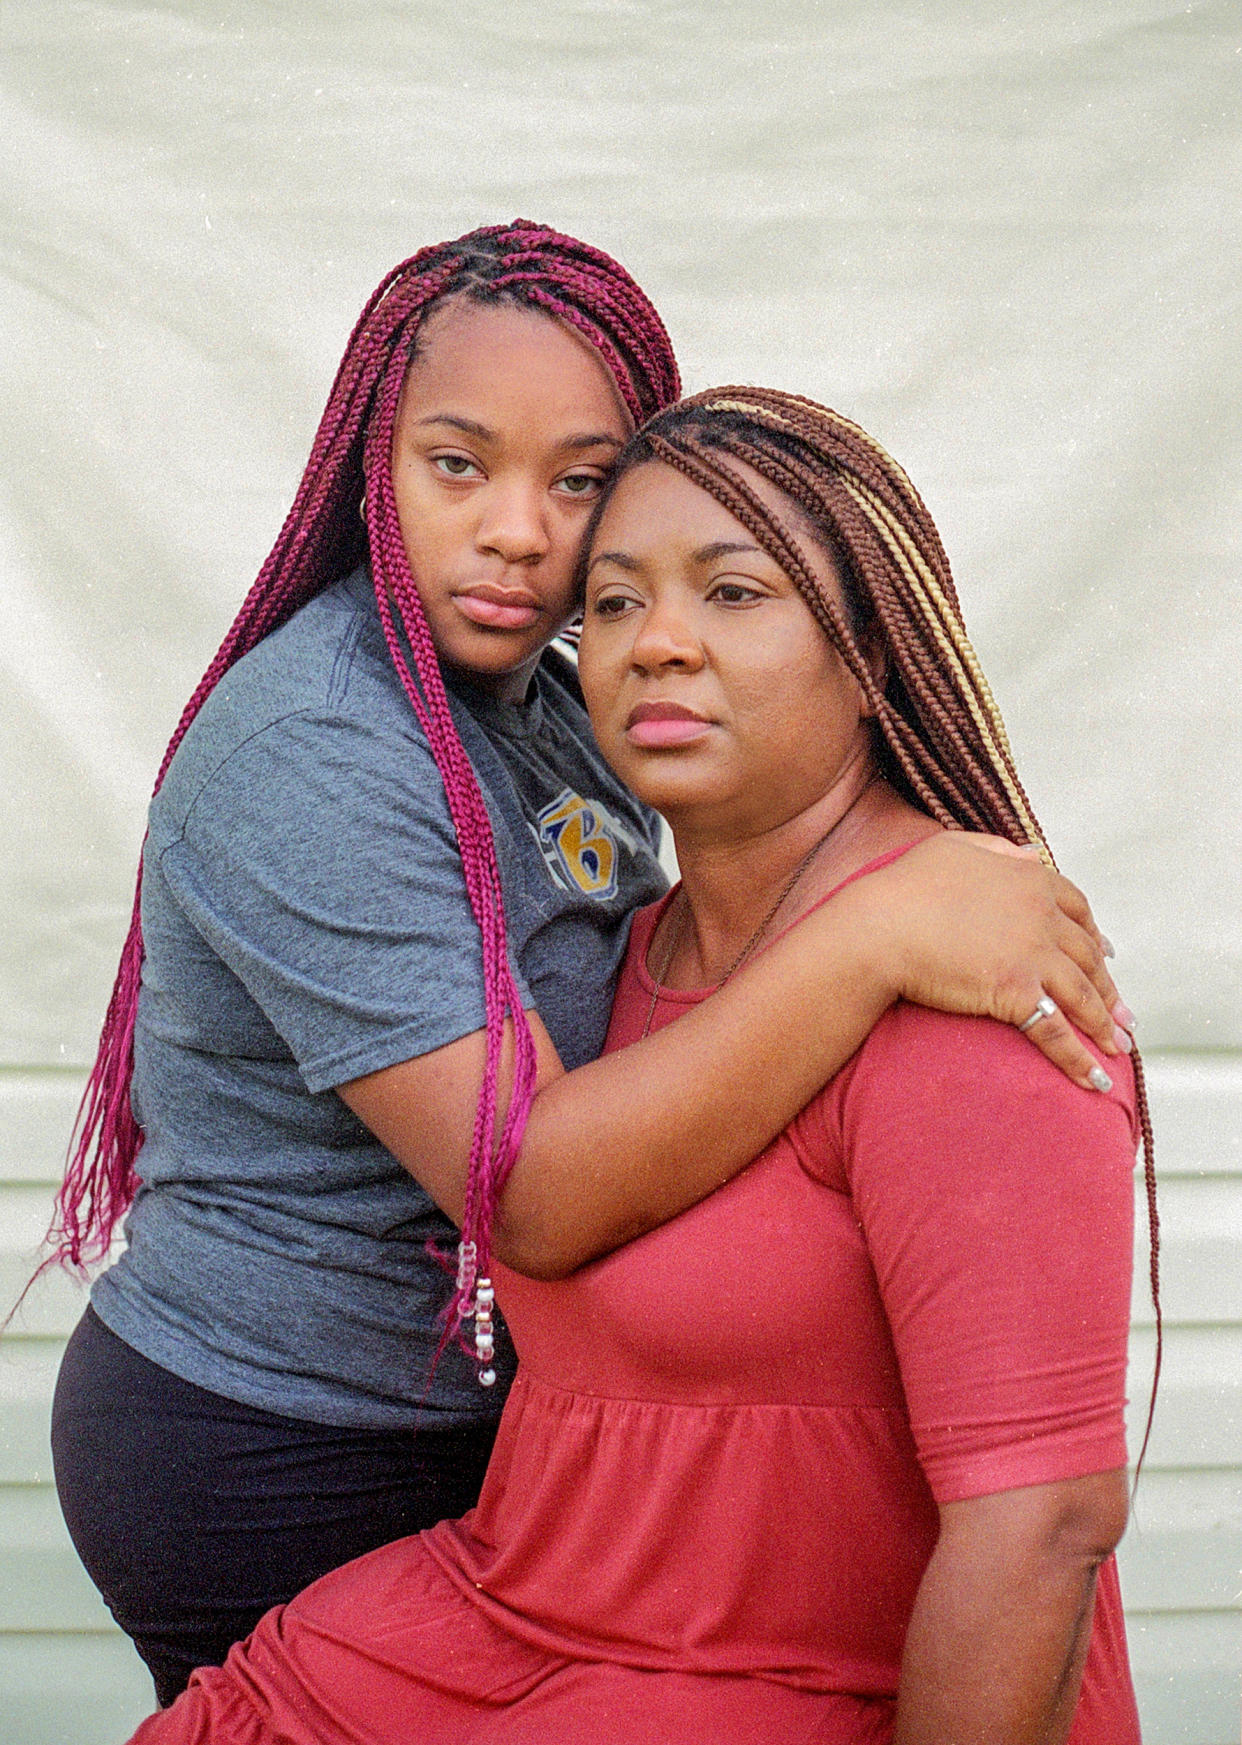 Image: Diamond with her mother Melody Campbell. (Imani Khayyam for NBC News)